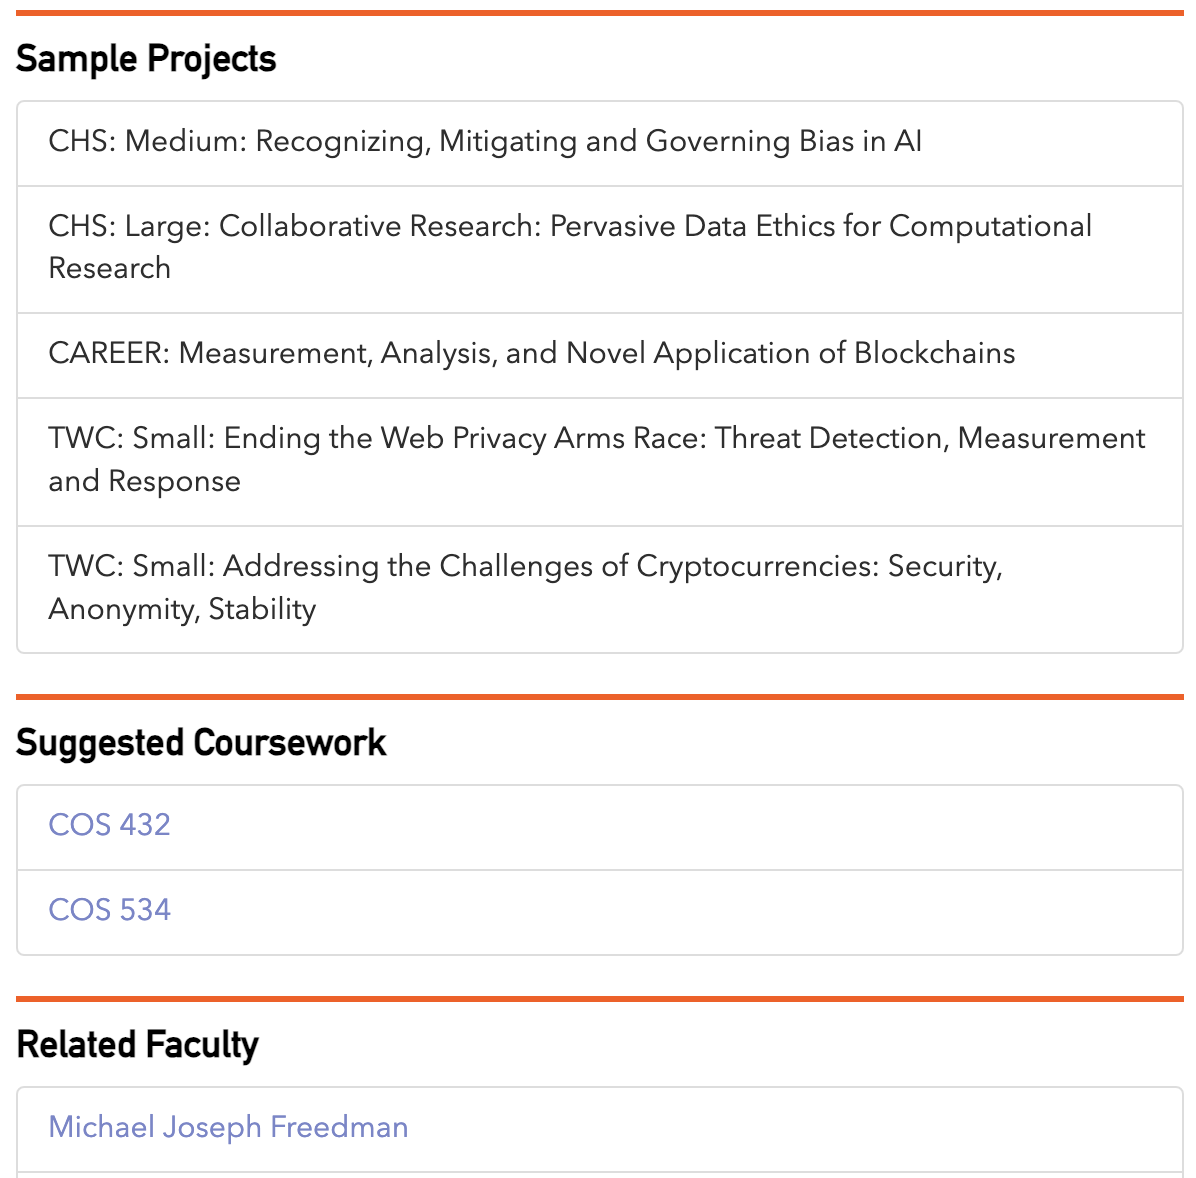 View of the sample projects, suggested coursework, and related faculty from Professor Narayanan's page